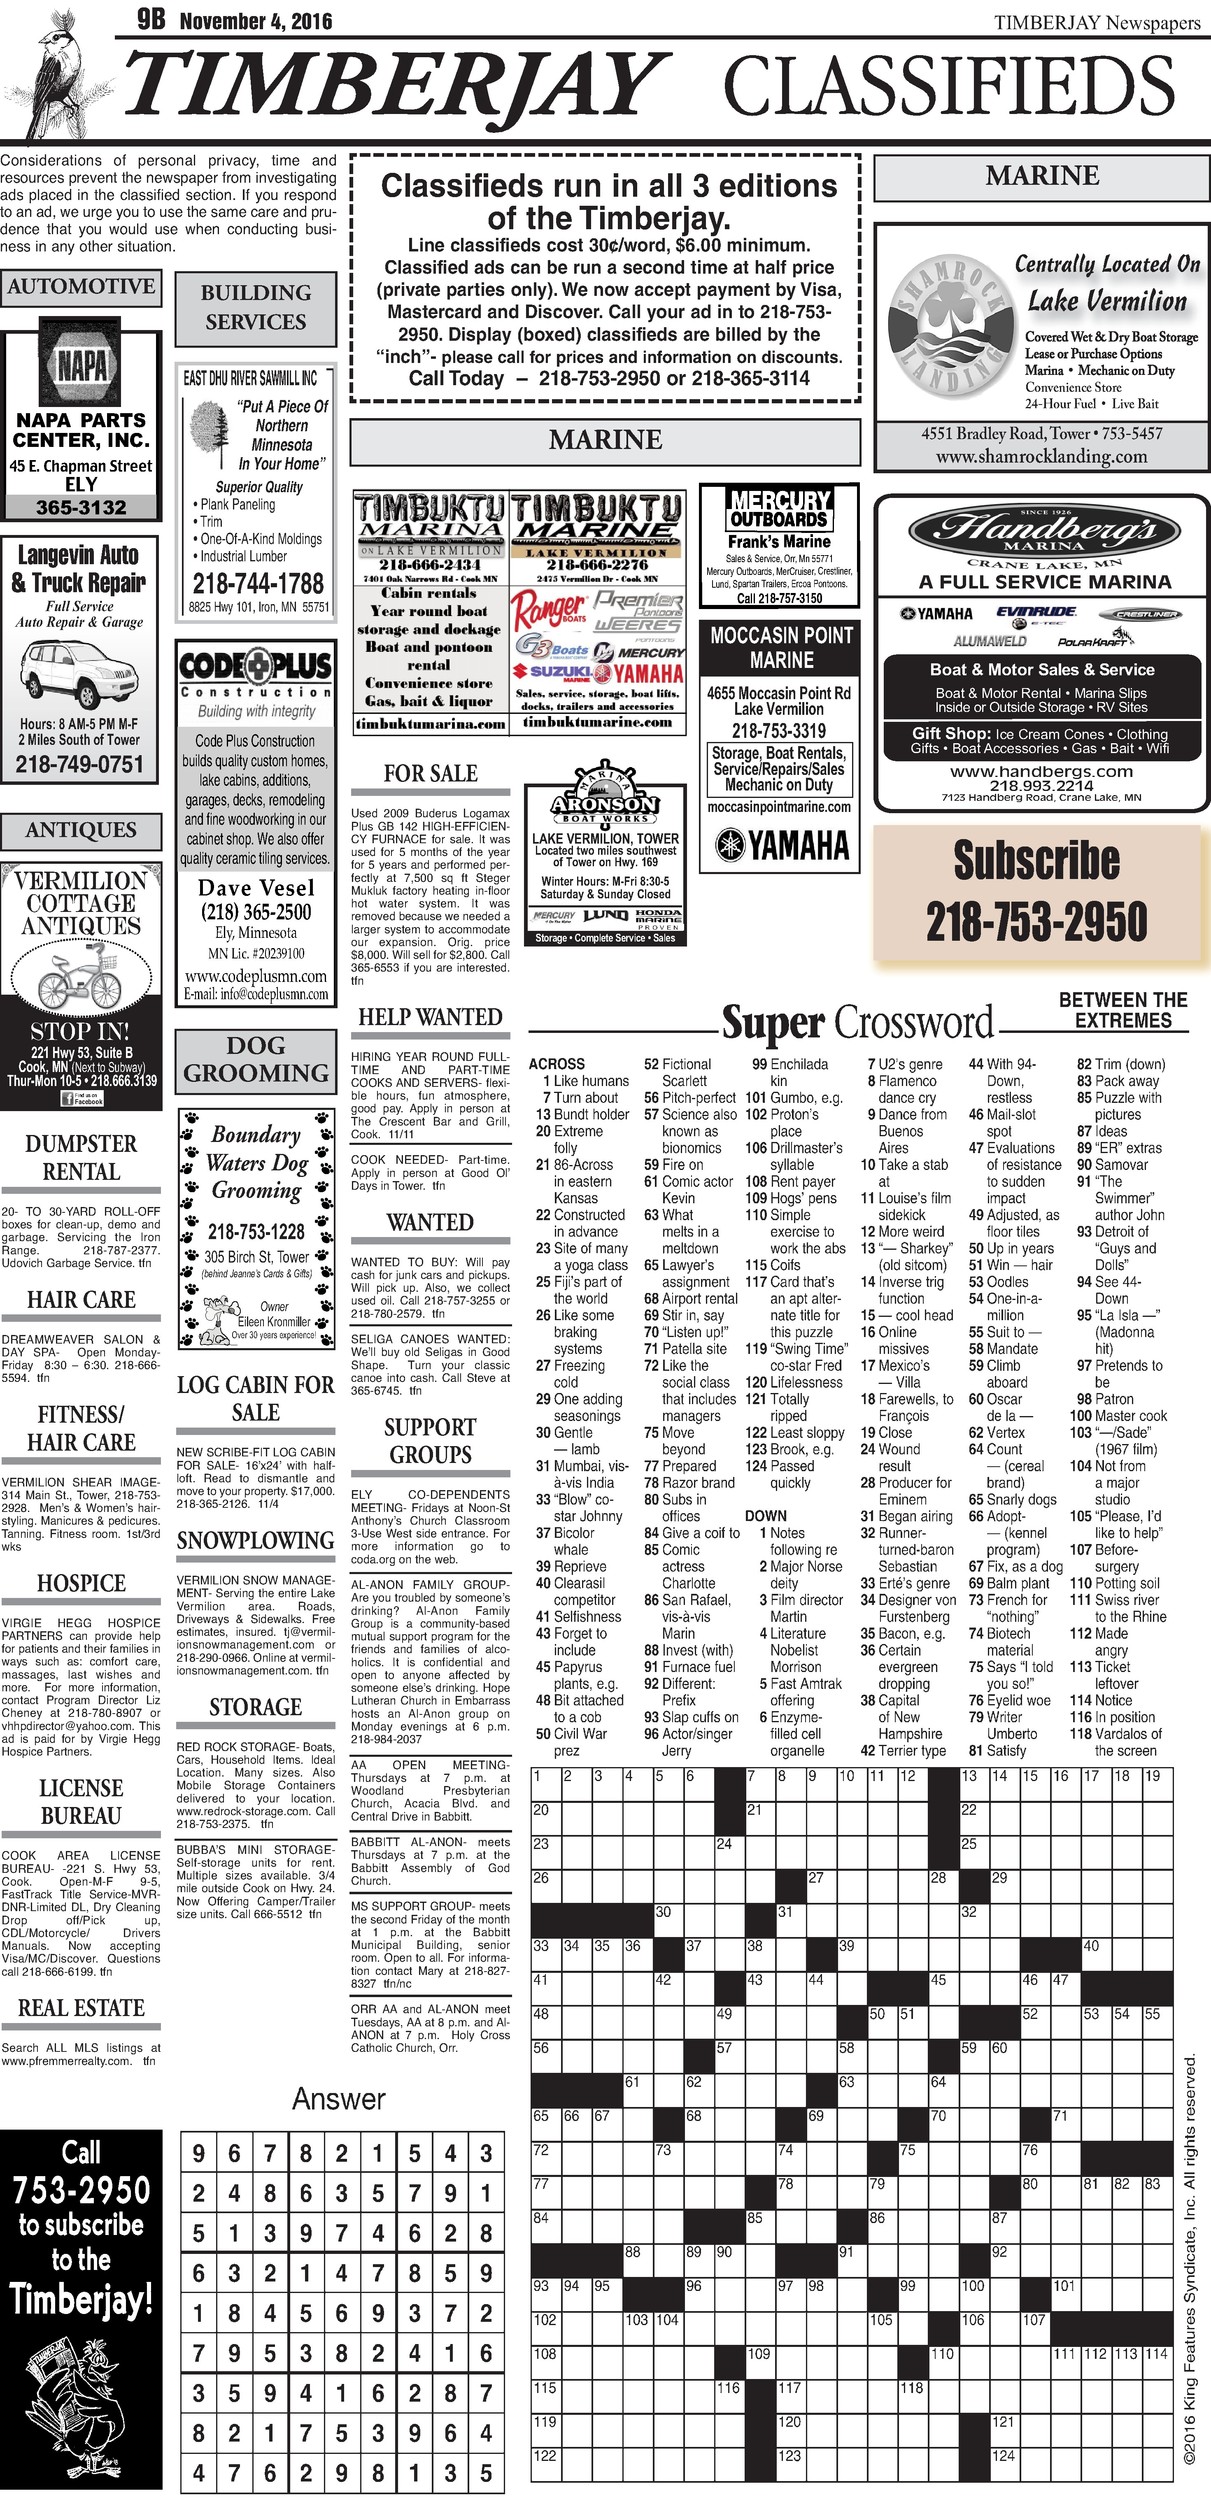 Click here to view the legal notices and classifieds from page B9